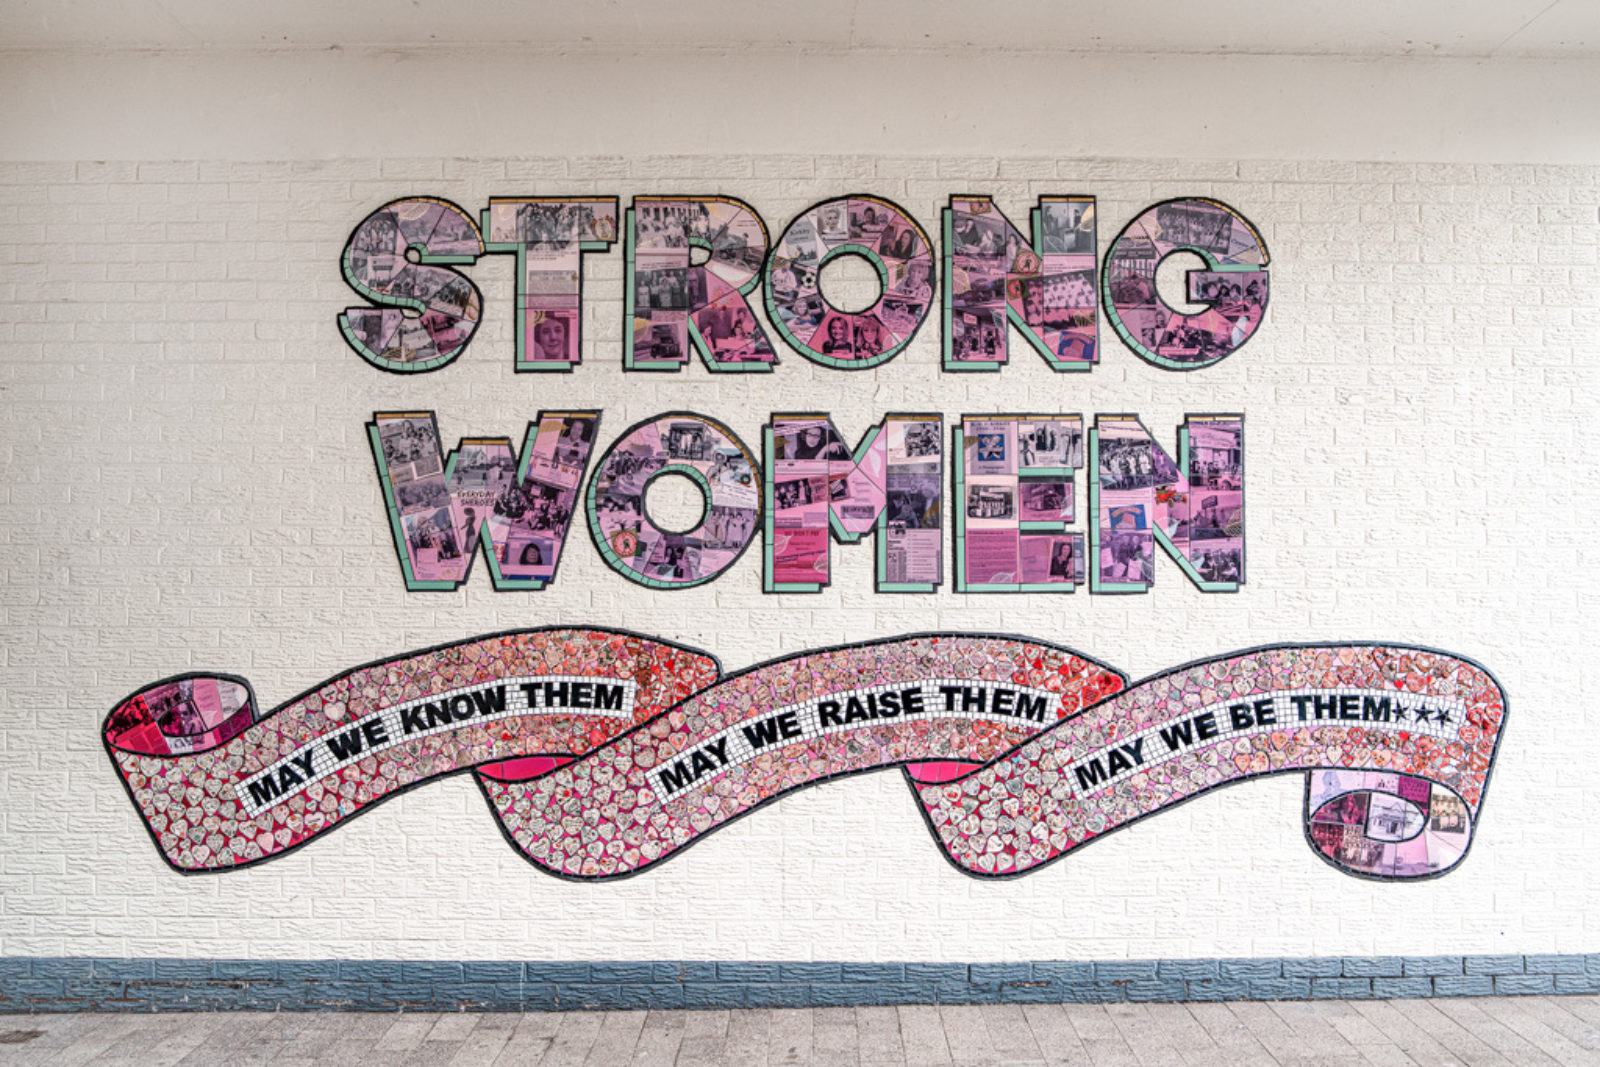 The strong women of knowsley mural is photographed in Kirkby. It is on a white brick wall, and reads ’Strong Women’ In tiled pink capital letters with newspaper clippings and black and white photographs printed on them. Underneath is a scroll reading ‘May We Know them, May we raise them, may we be them’ surrounded by clay hearts made by the community, dedicated to strong women in their lives.